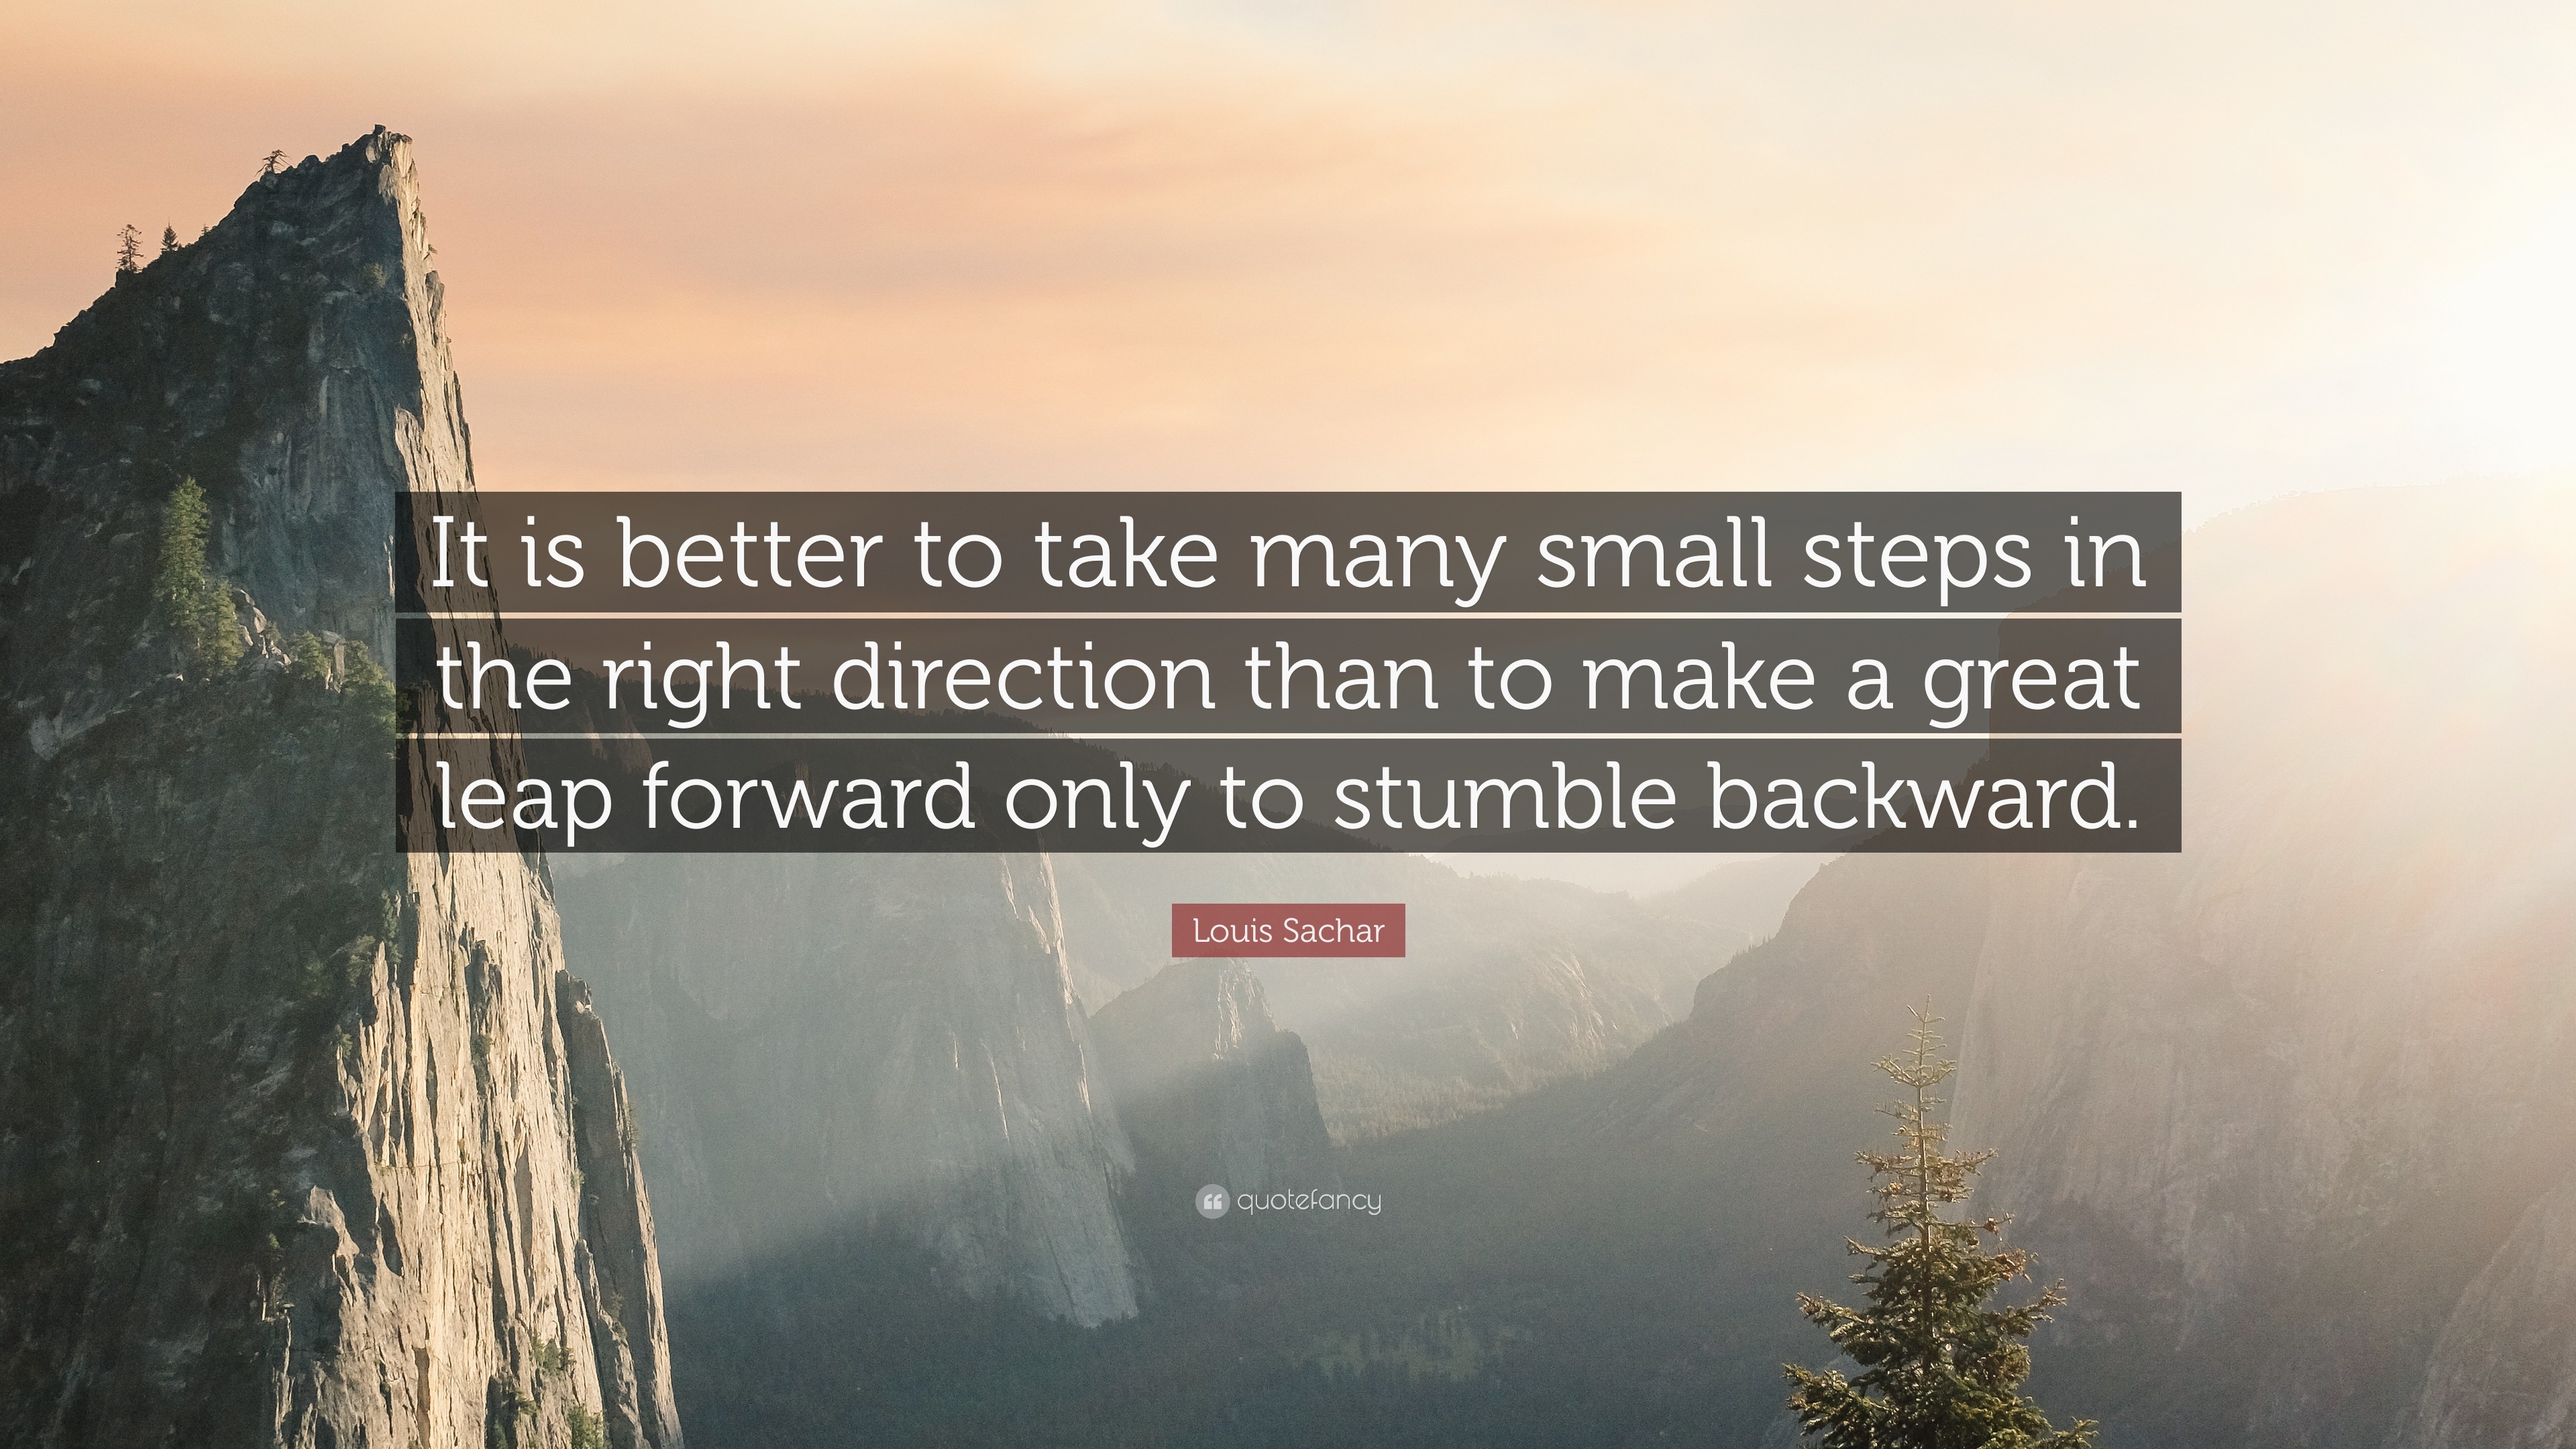 Decide to take the small steps in the right direction today